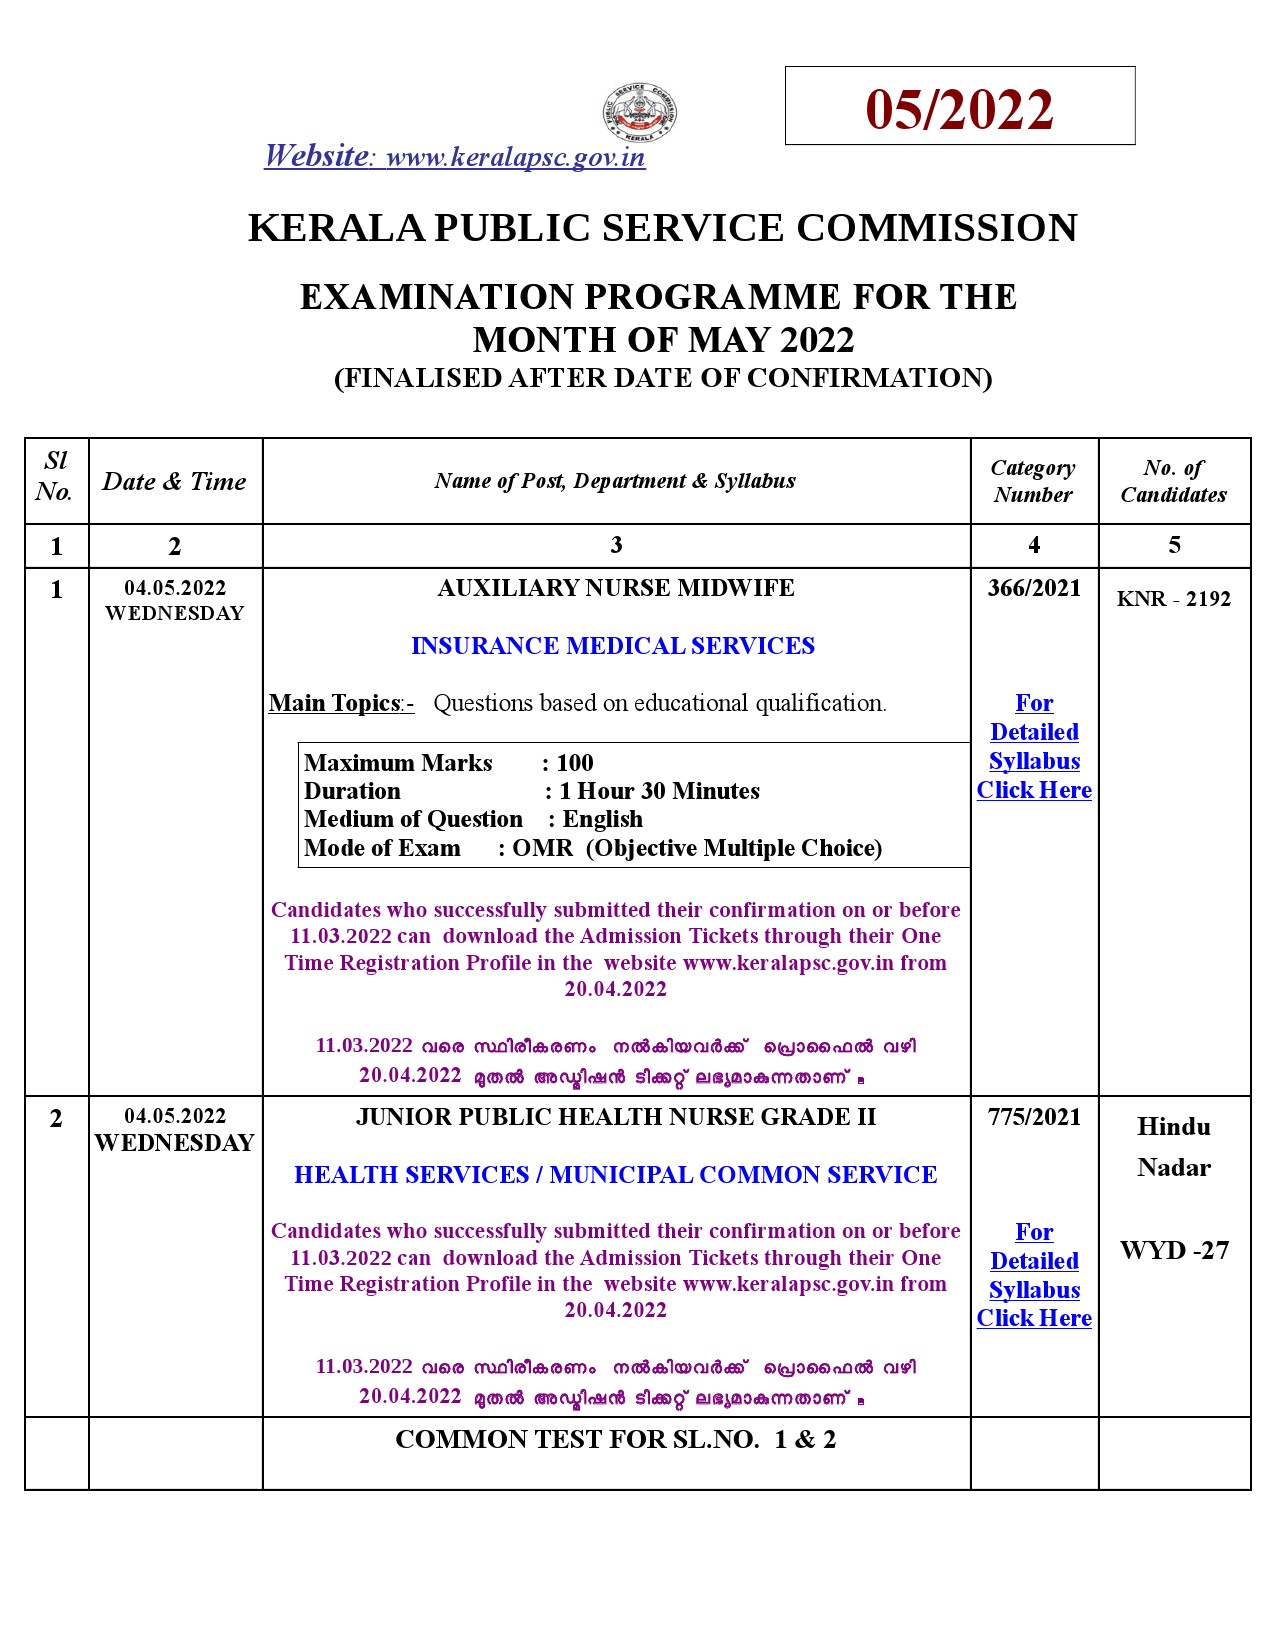 KPSC EXAMINATION PROGRAMME FOR THE MONTH OF MAY 2022 - Notification Image 1